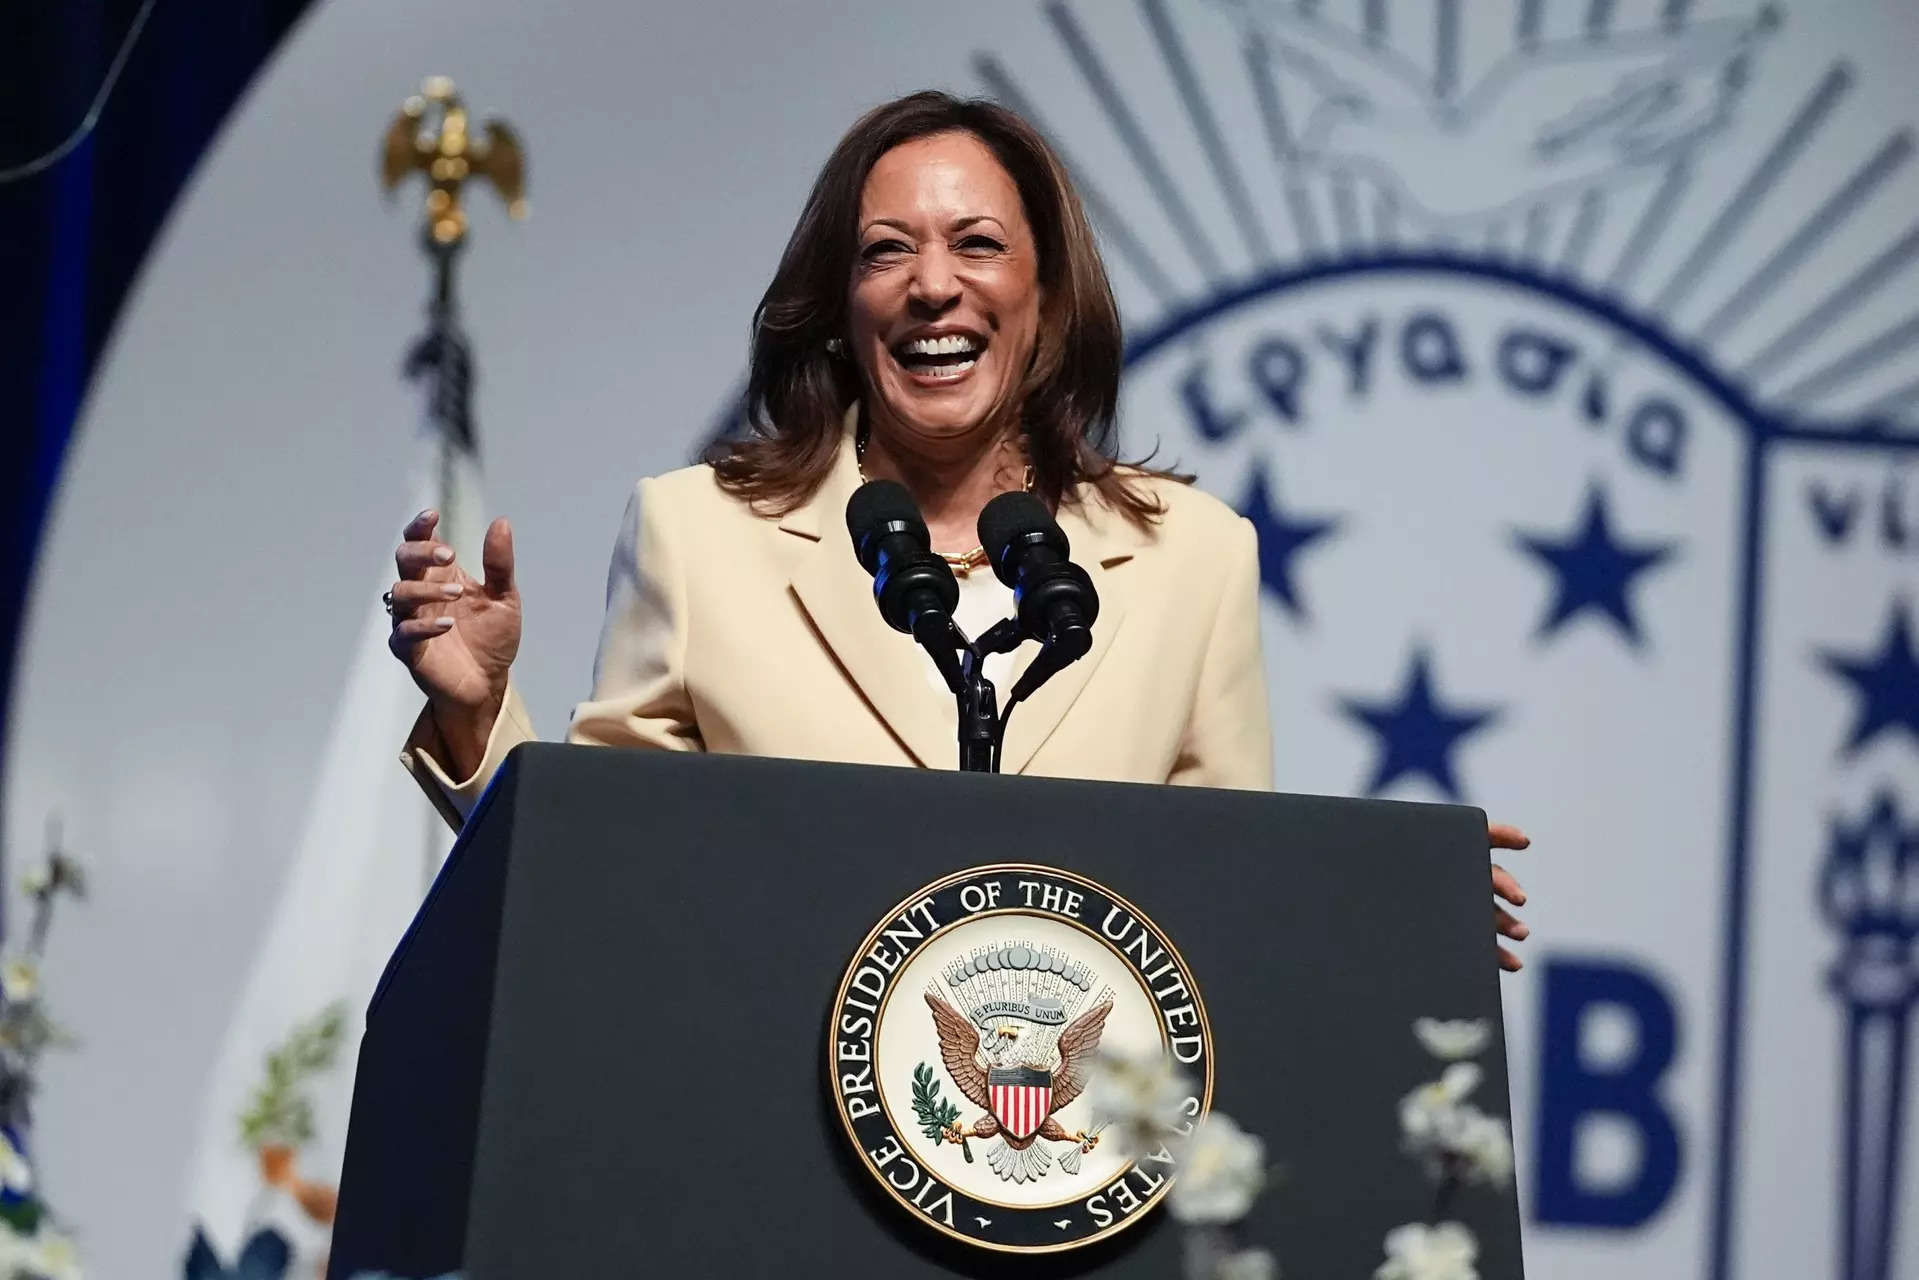 Kamala Harris suits up in classic pumps for Zeta Phi Beta. Details here 